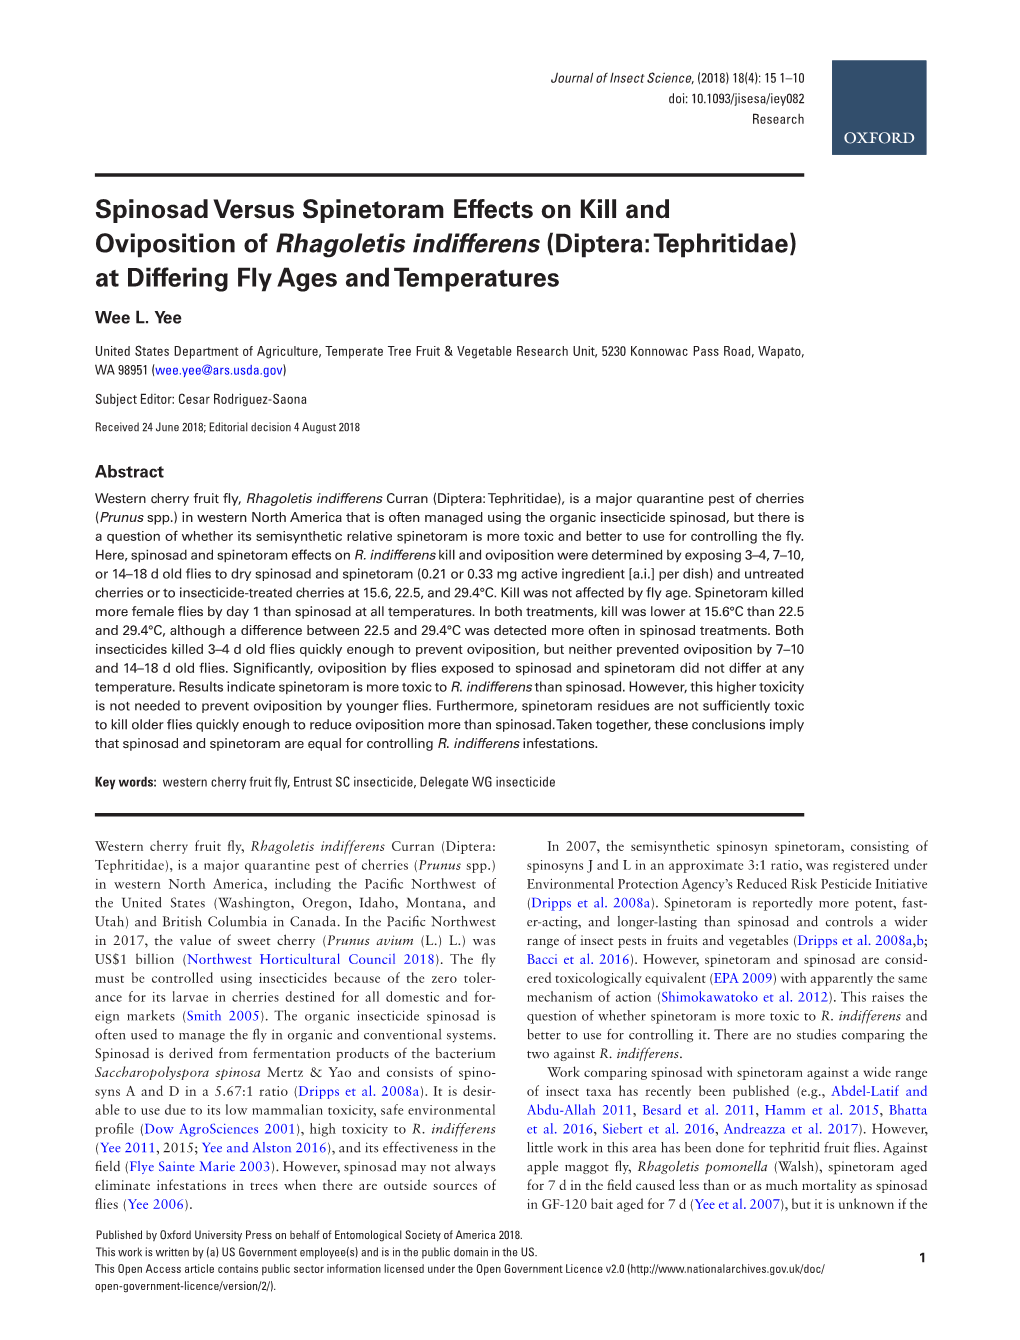 Spinosad Versus Spinetoram Effects on Kill and Oviposition Of